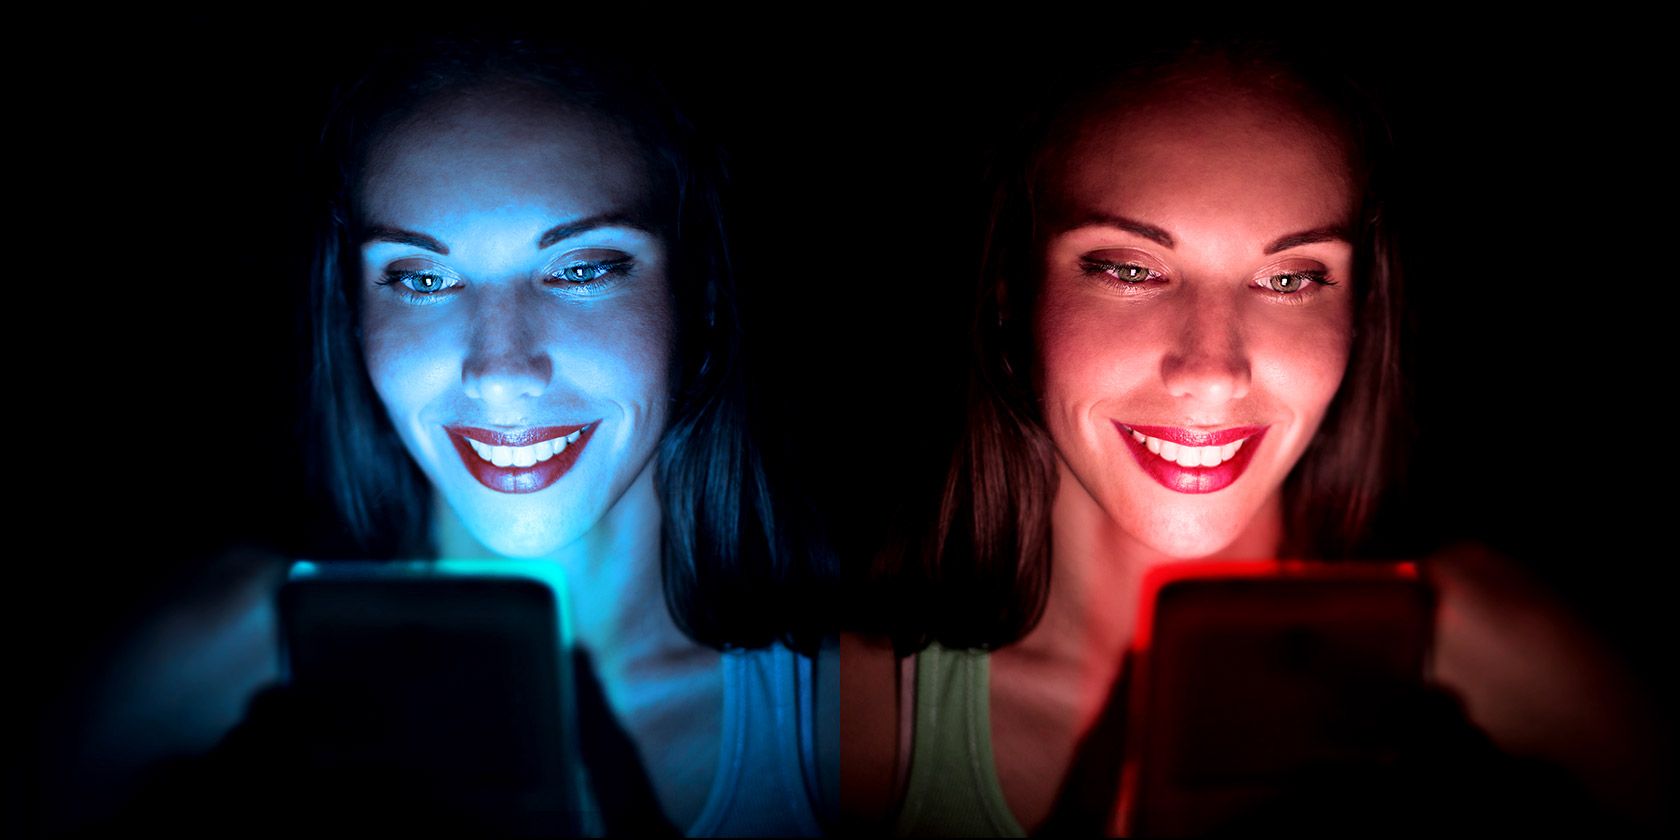 How to Use a Blue Light Filter on Your Phone